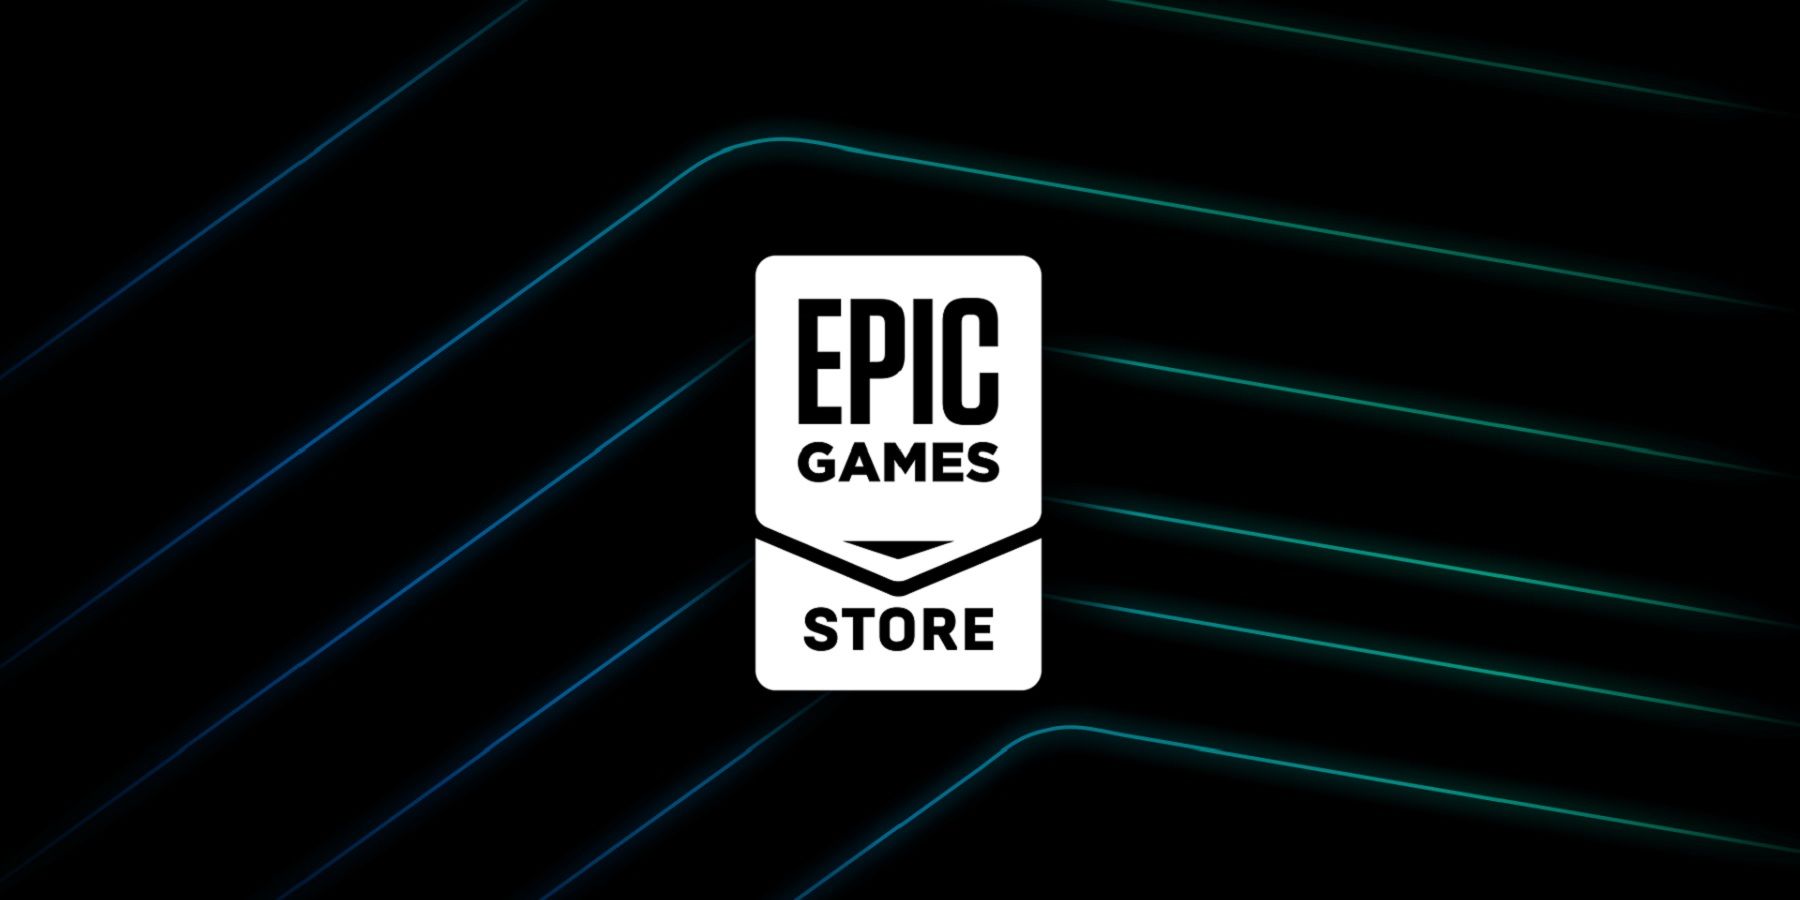 epic games store background with neon lines